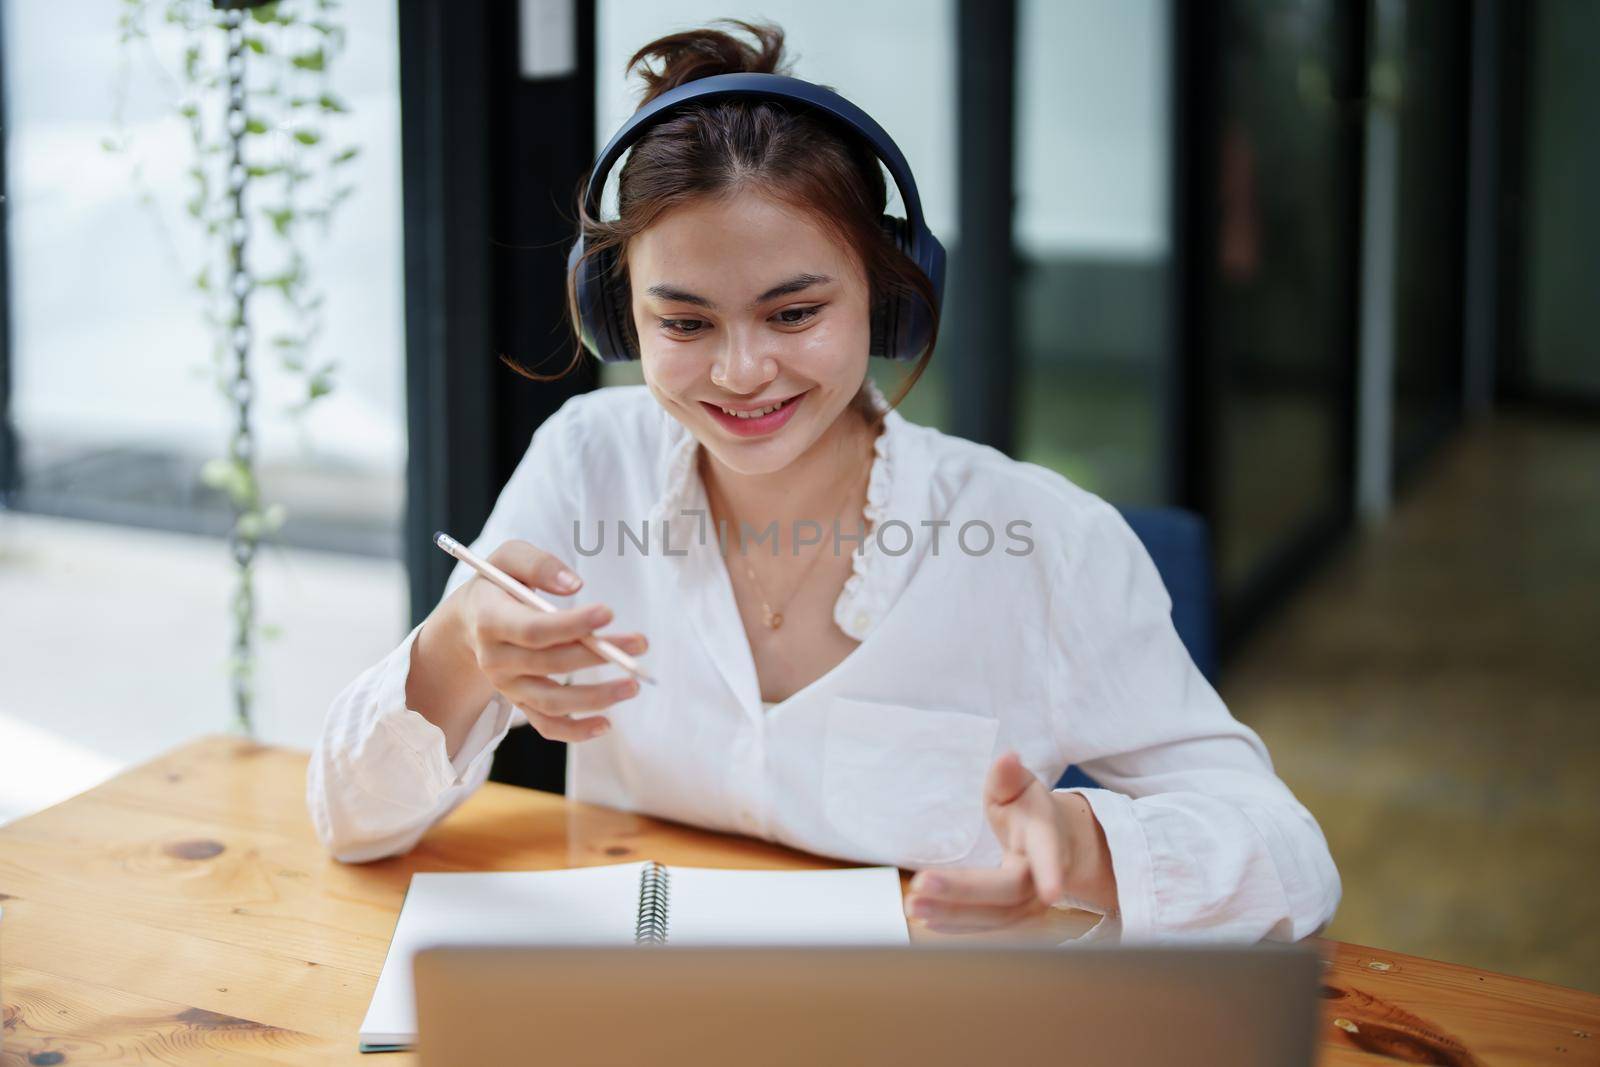 woman using a computer and earphone during a video conference by Manastrong